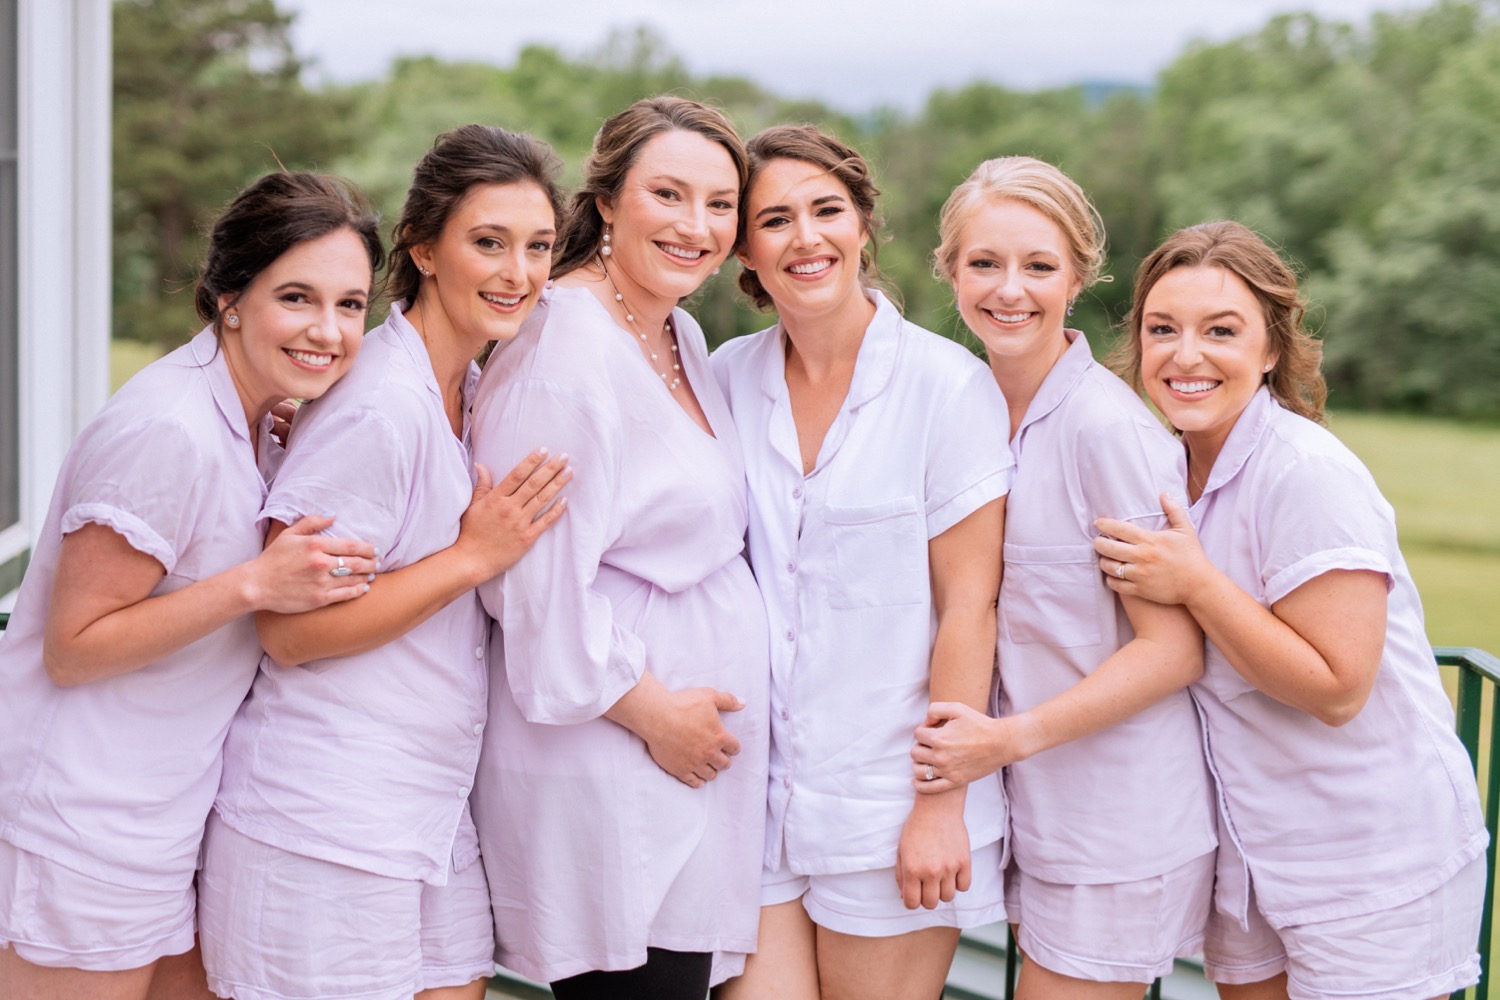 Bride and bridesmaids lined up in matching pajamas before getting into dresses